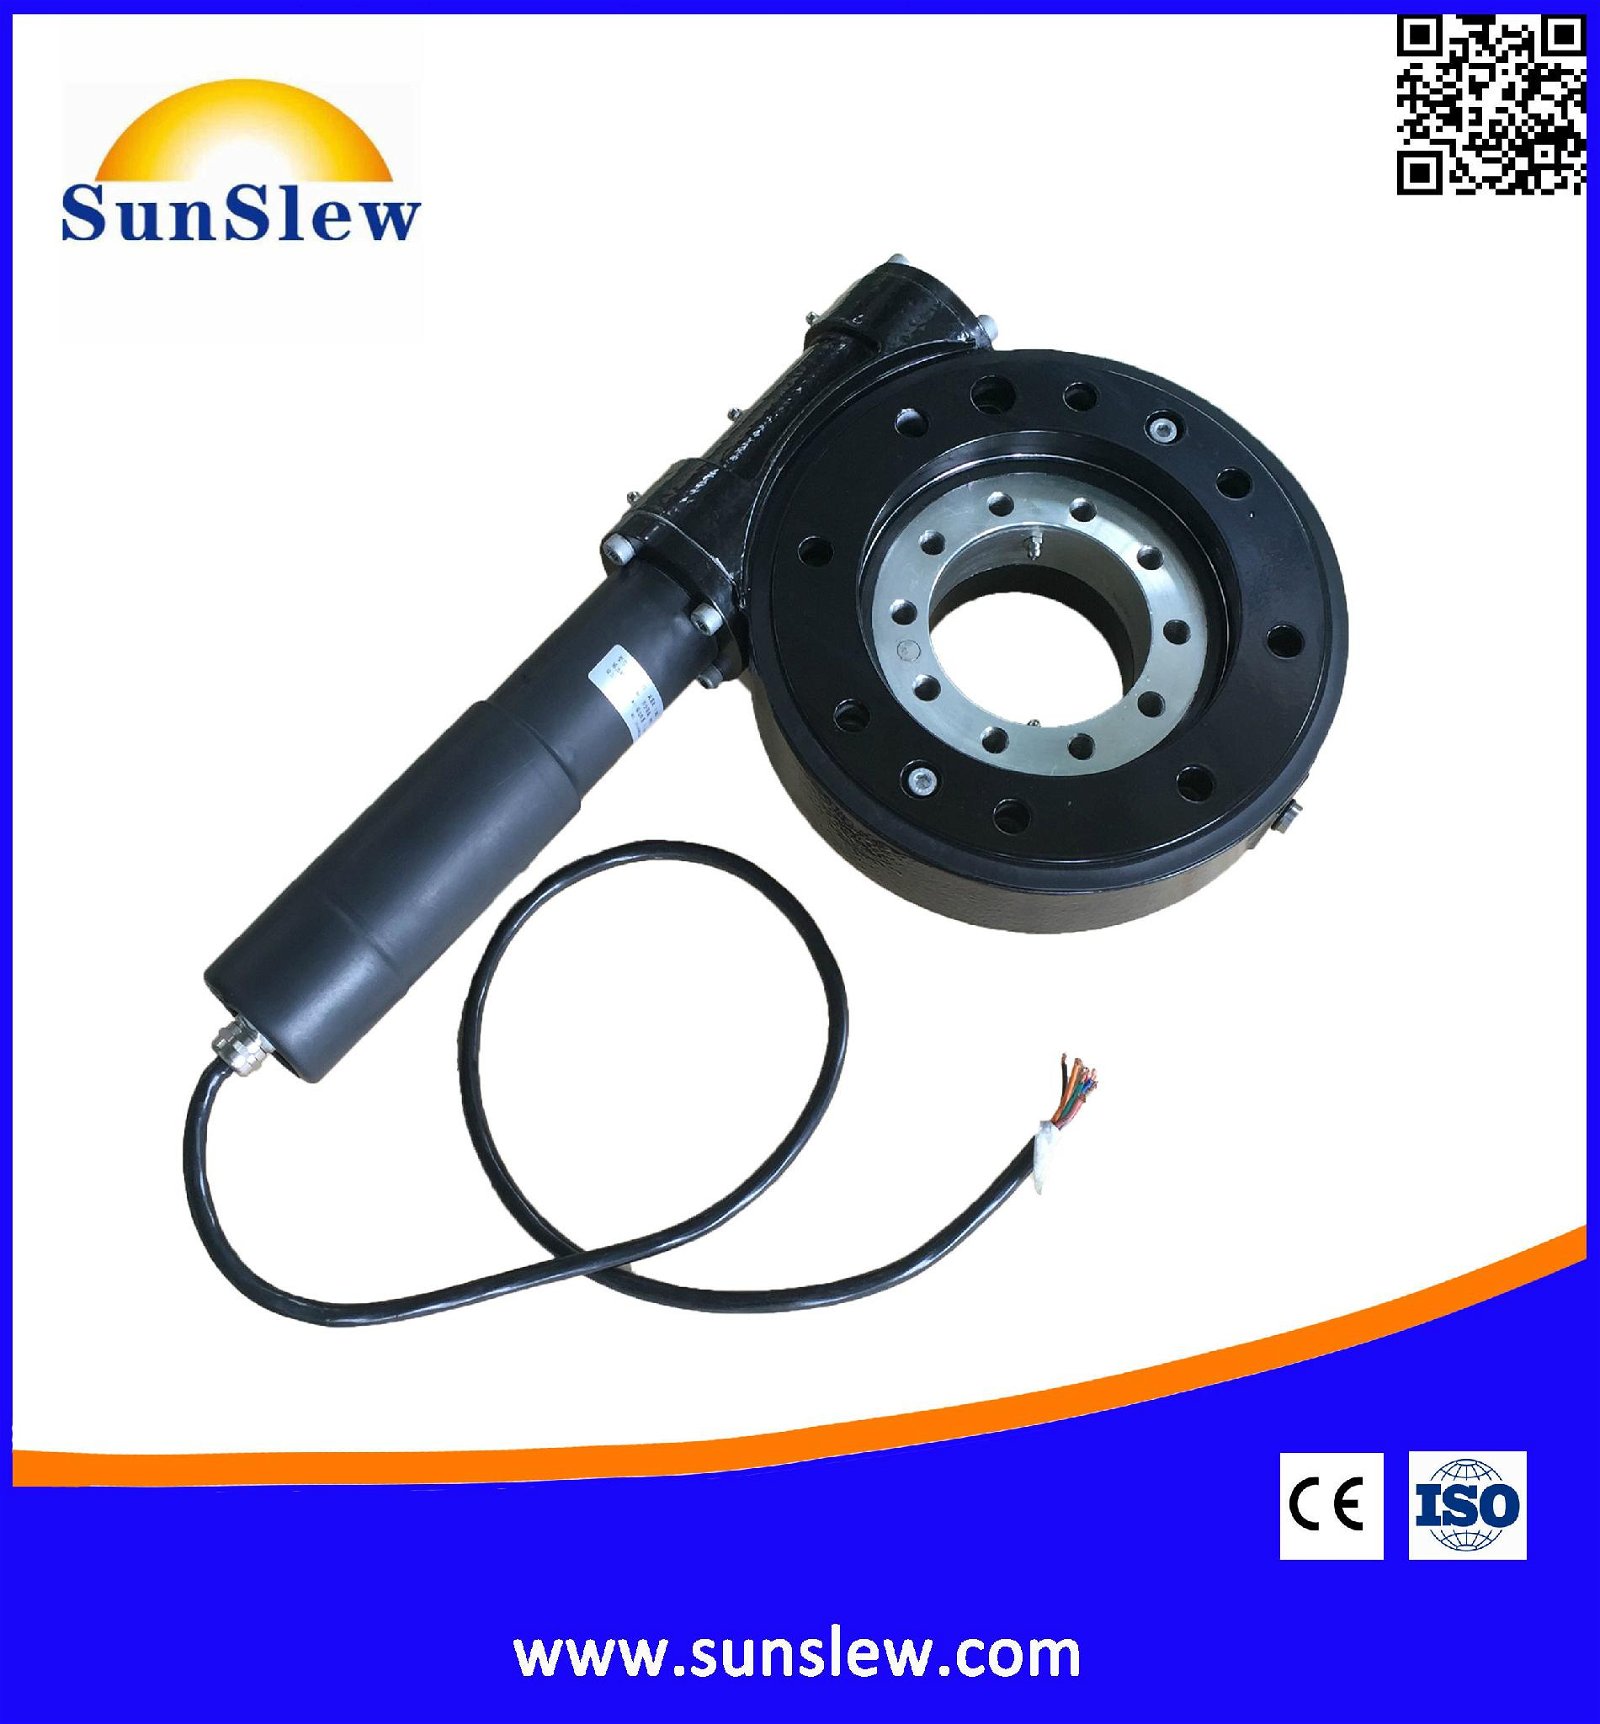 Sunslew SD7 slewing drive 2